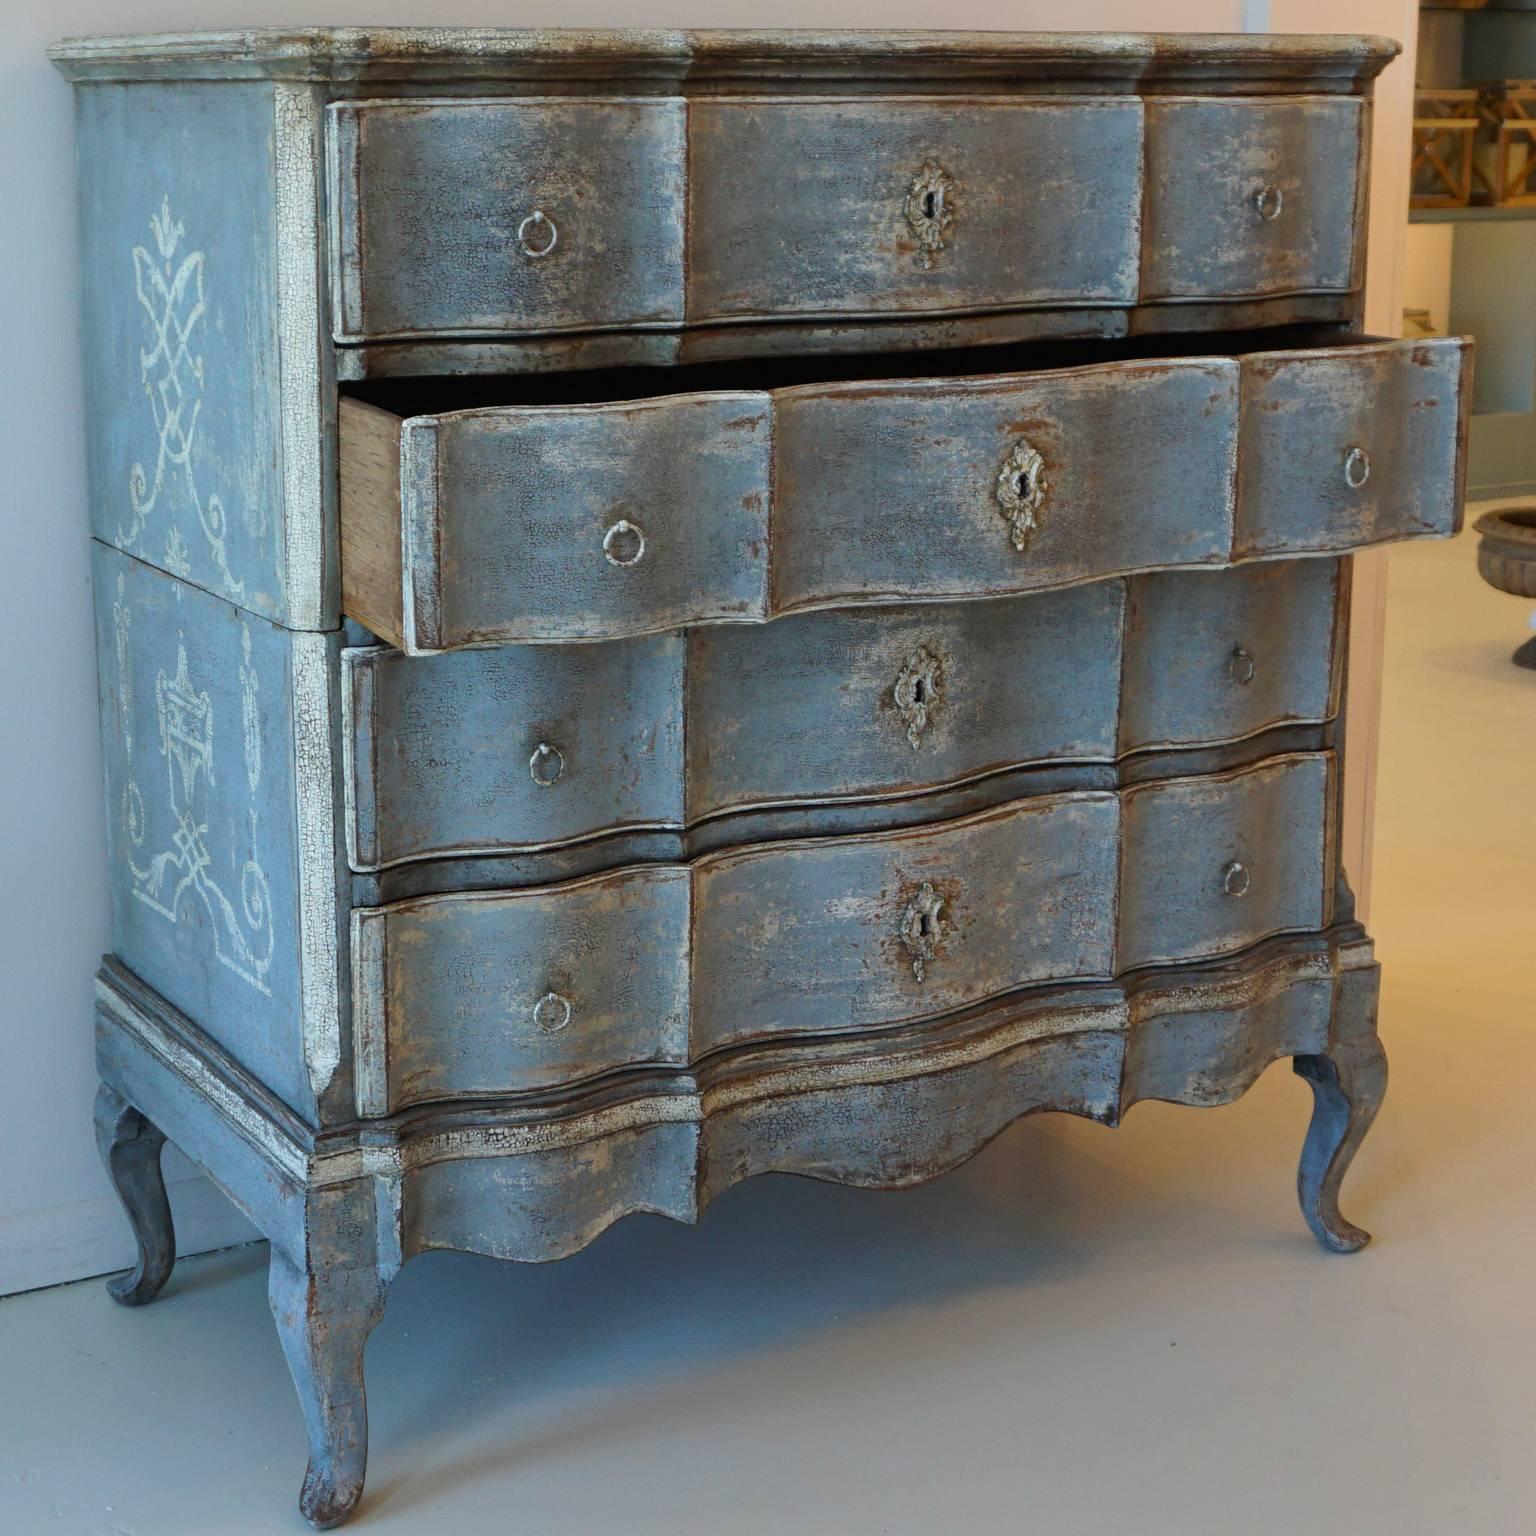 Chest of drawers with wavy front and four drawers. The side panels 
are cut at the bottom the blue painting is completed.
With floral elements on the side panels.